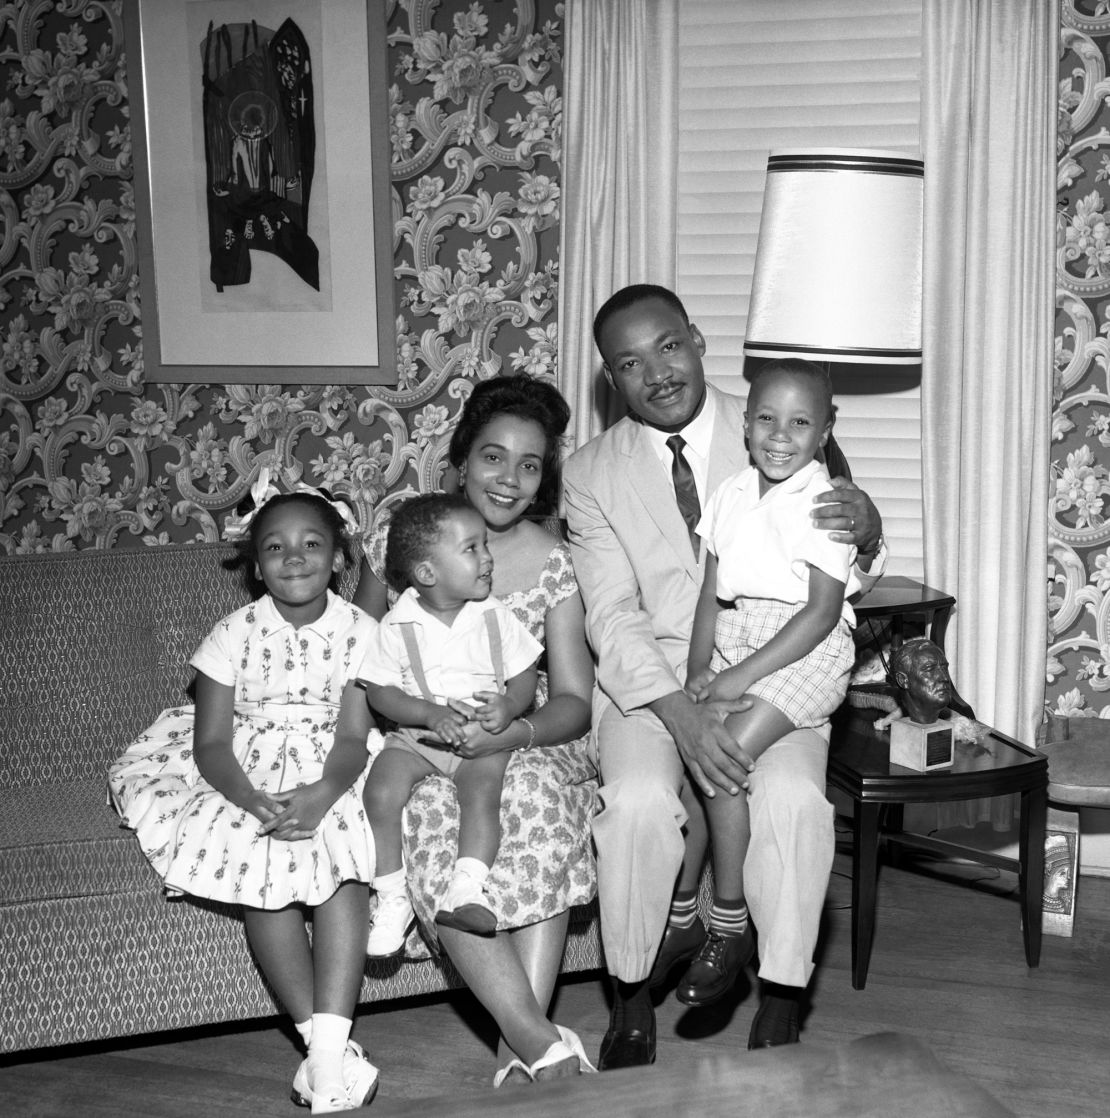 American Baptist minister and activist Martin Luther King Jr. (1929 - 1968) poses for a family portrait with his daughter, 7-year-old Yolanda Denise King (1955 - 2007), son, 18 months Dexter Scott King, wife American author, activist, and civil rights leader Coretta Scott King (1927 - 2006) and son, 4-year-old Martin Luther King III at their home in Atlanta, Georgia, July 1962. (Photo by TPLP/Getty Images)